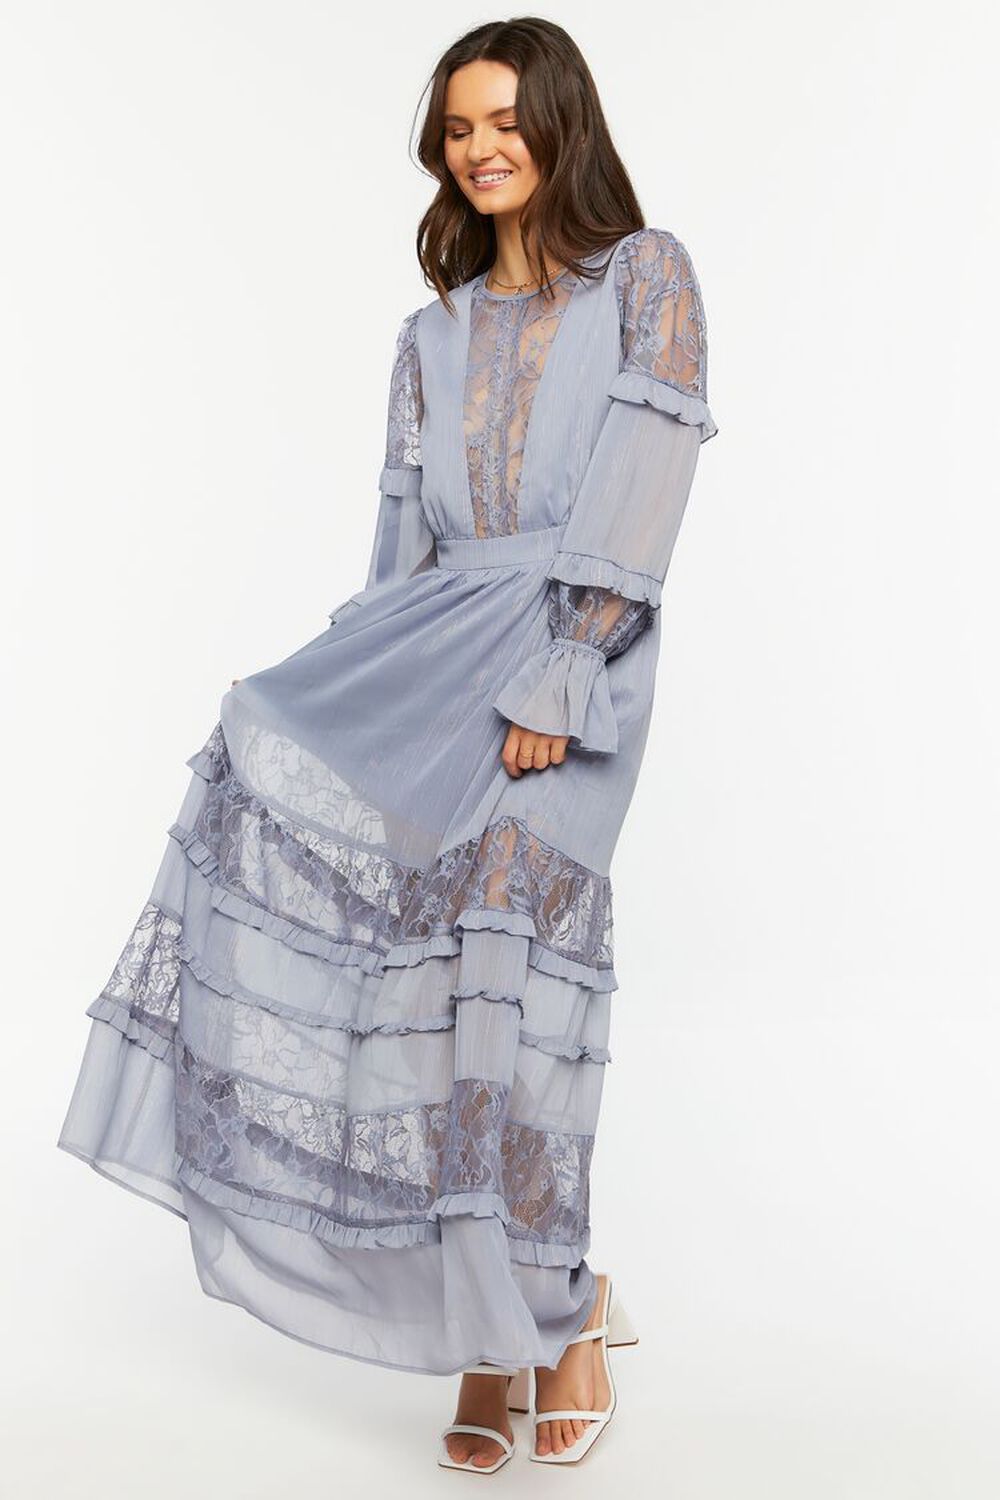 LIGHT BLUE Lace Tiered Long-Sleeve Maxi Dress, image 1